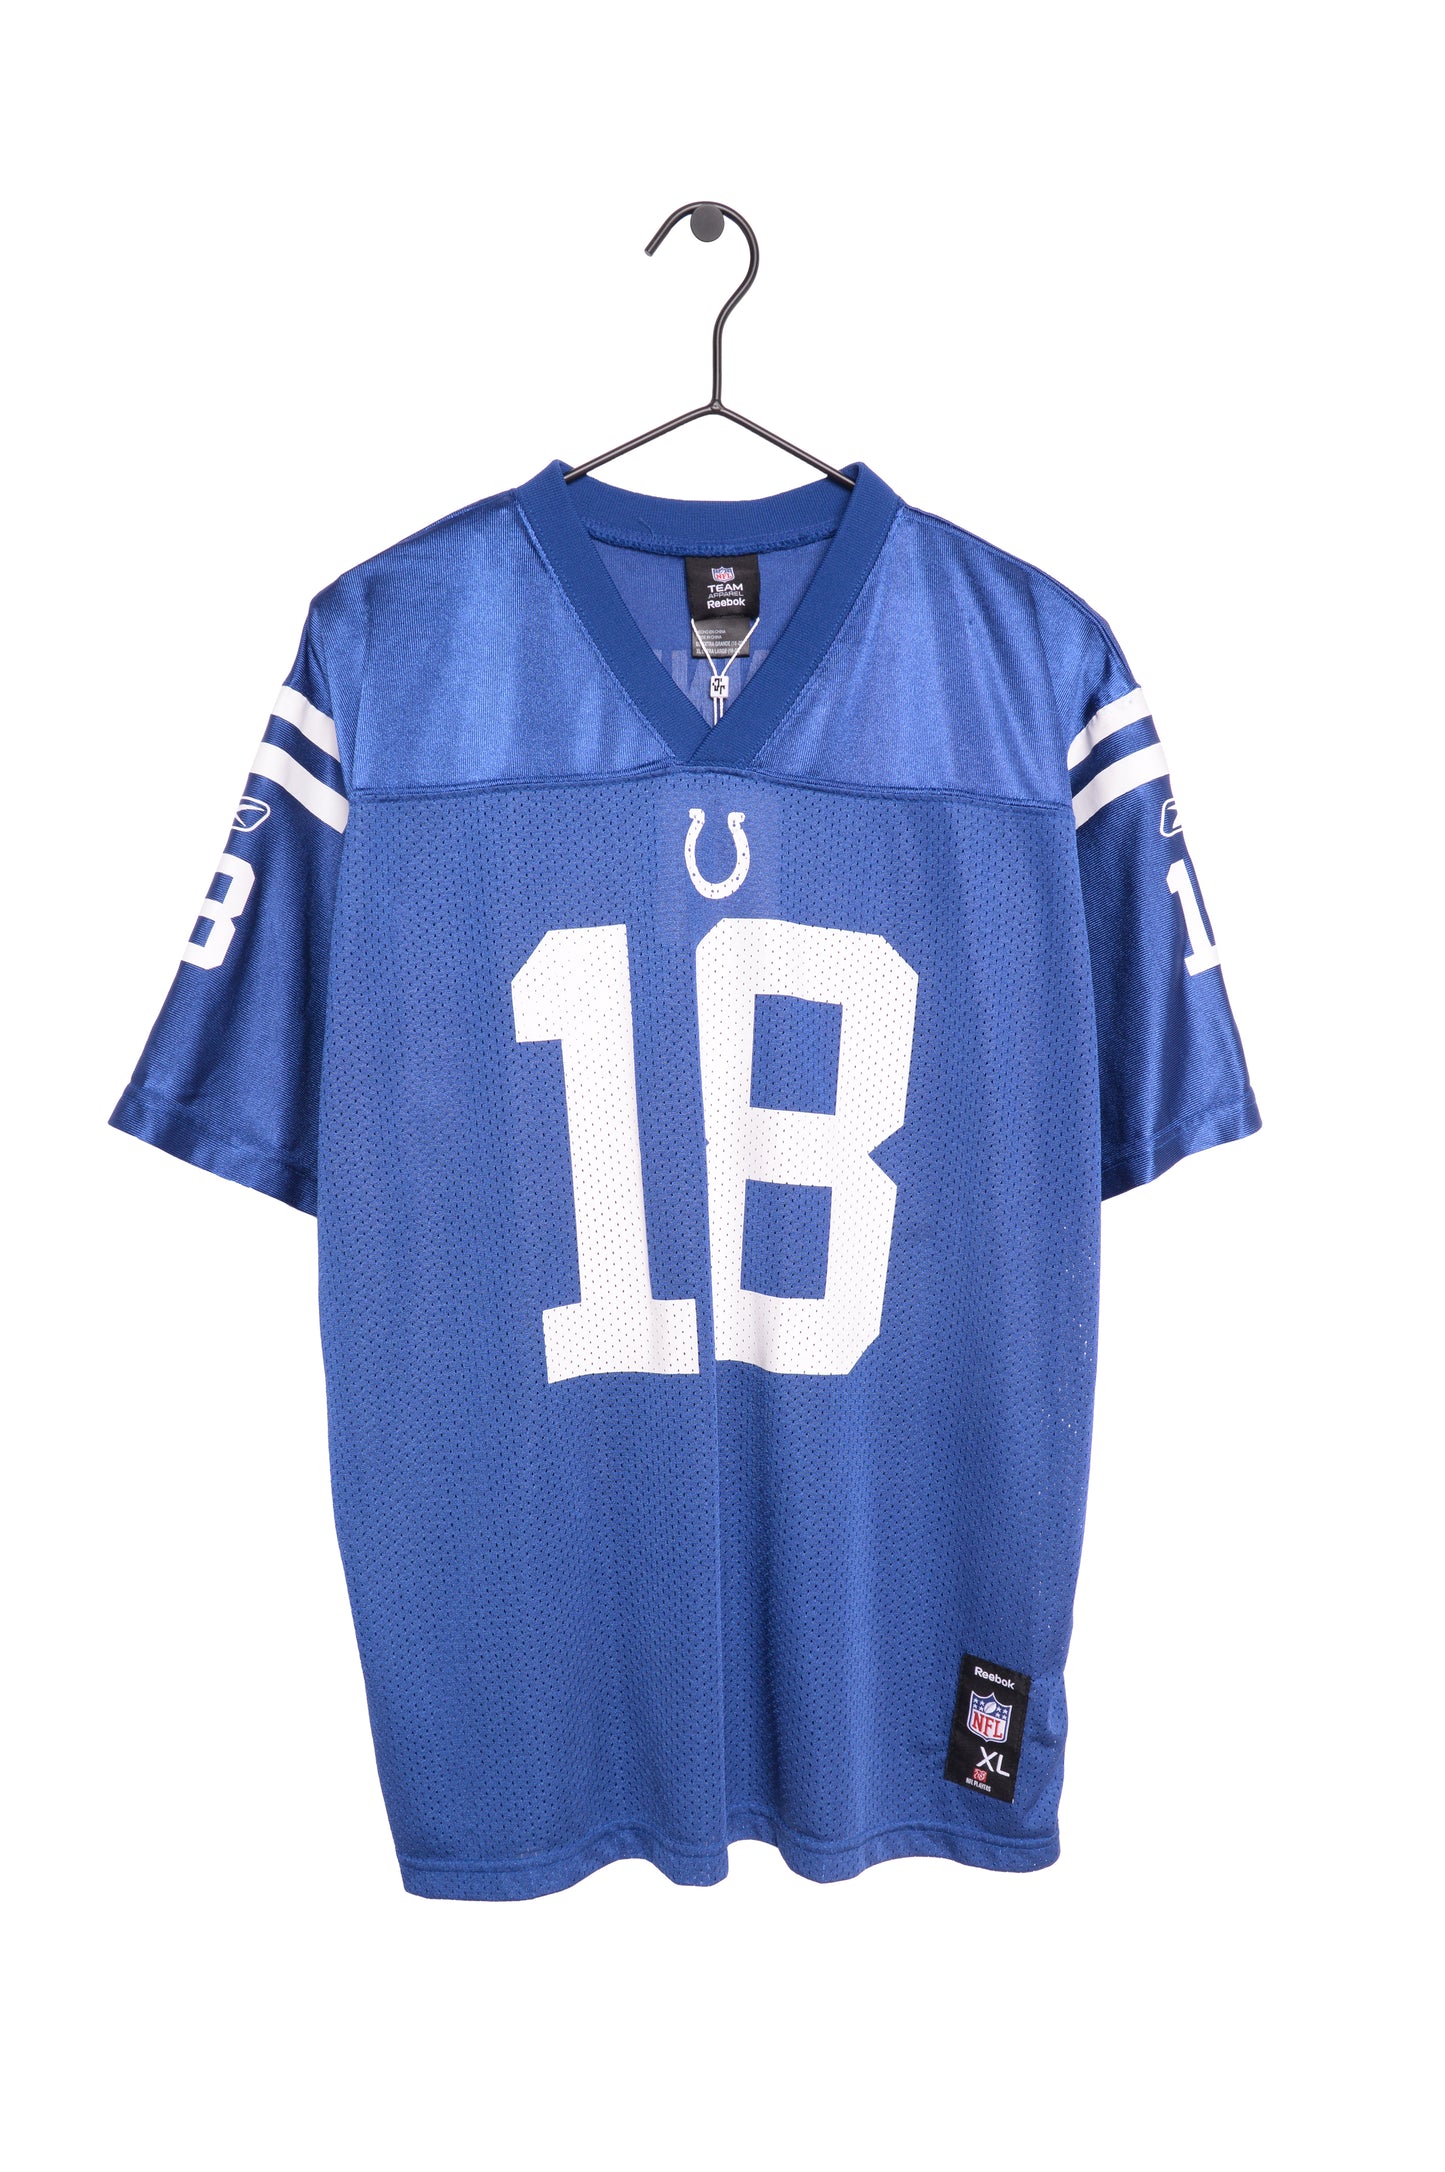 Indianapolis Colts Manning Jersey